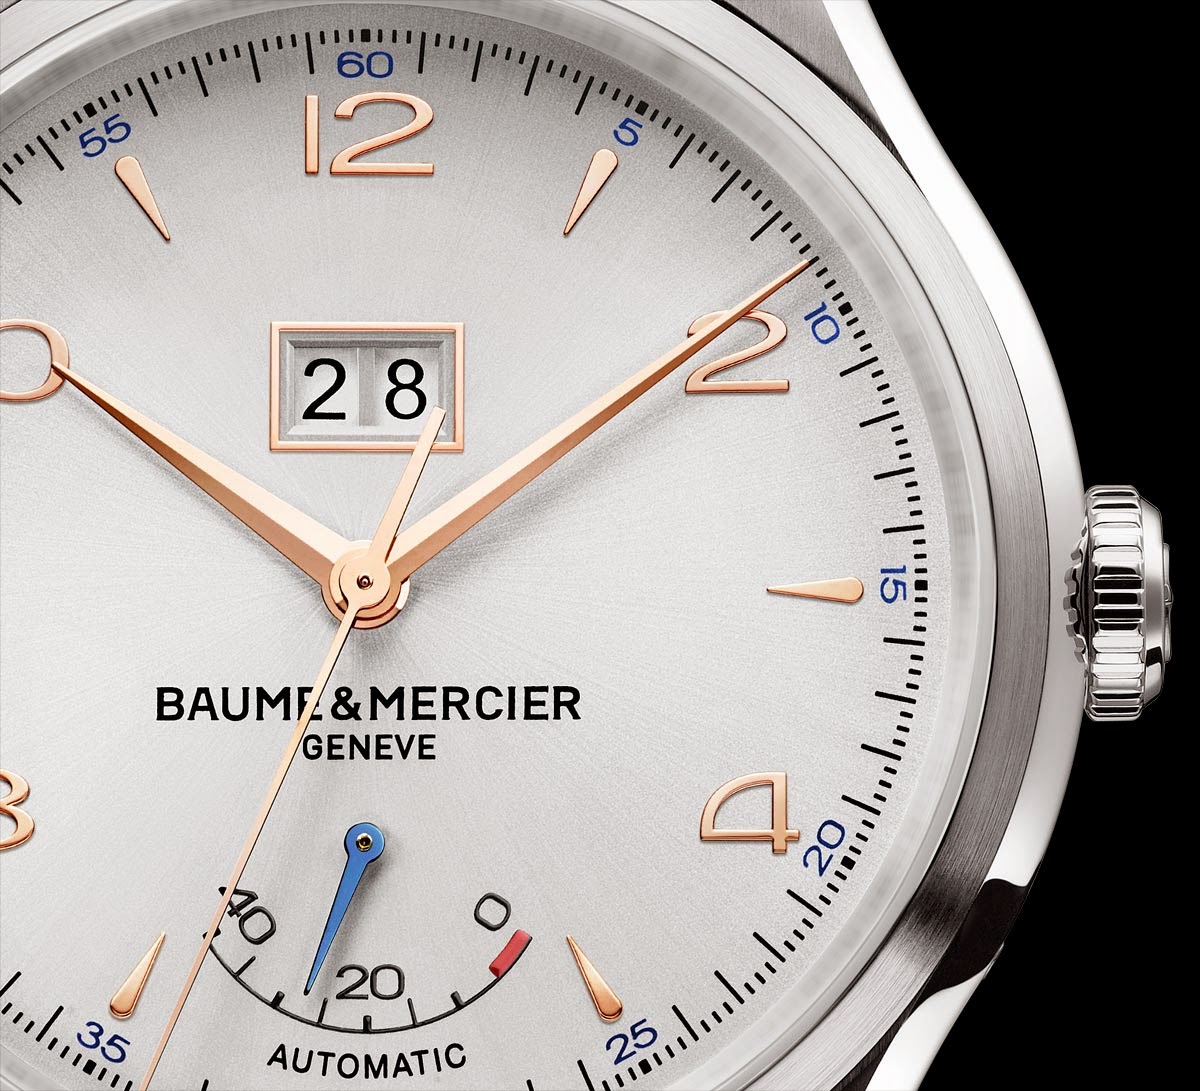 Baume & Mercier Clifton Automatic Big Date And Power Reserve watch dial